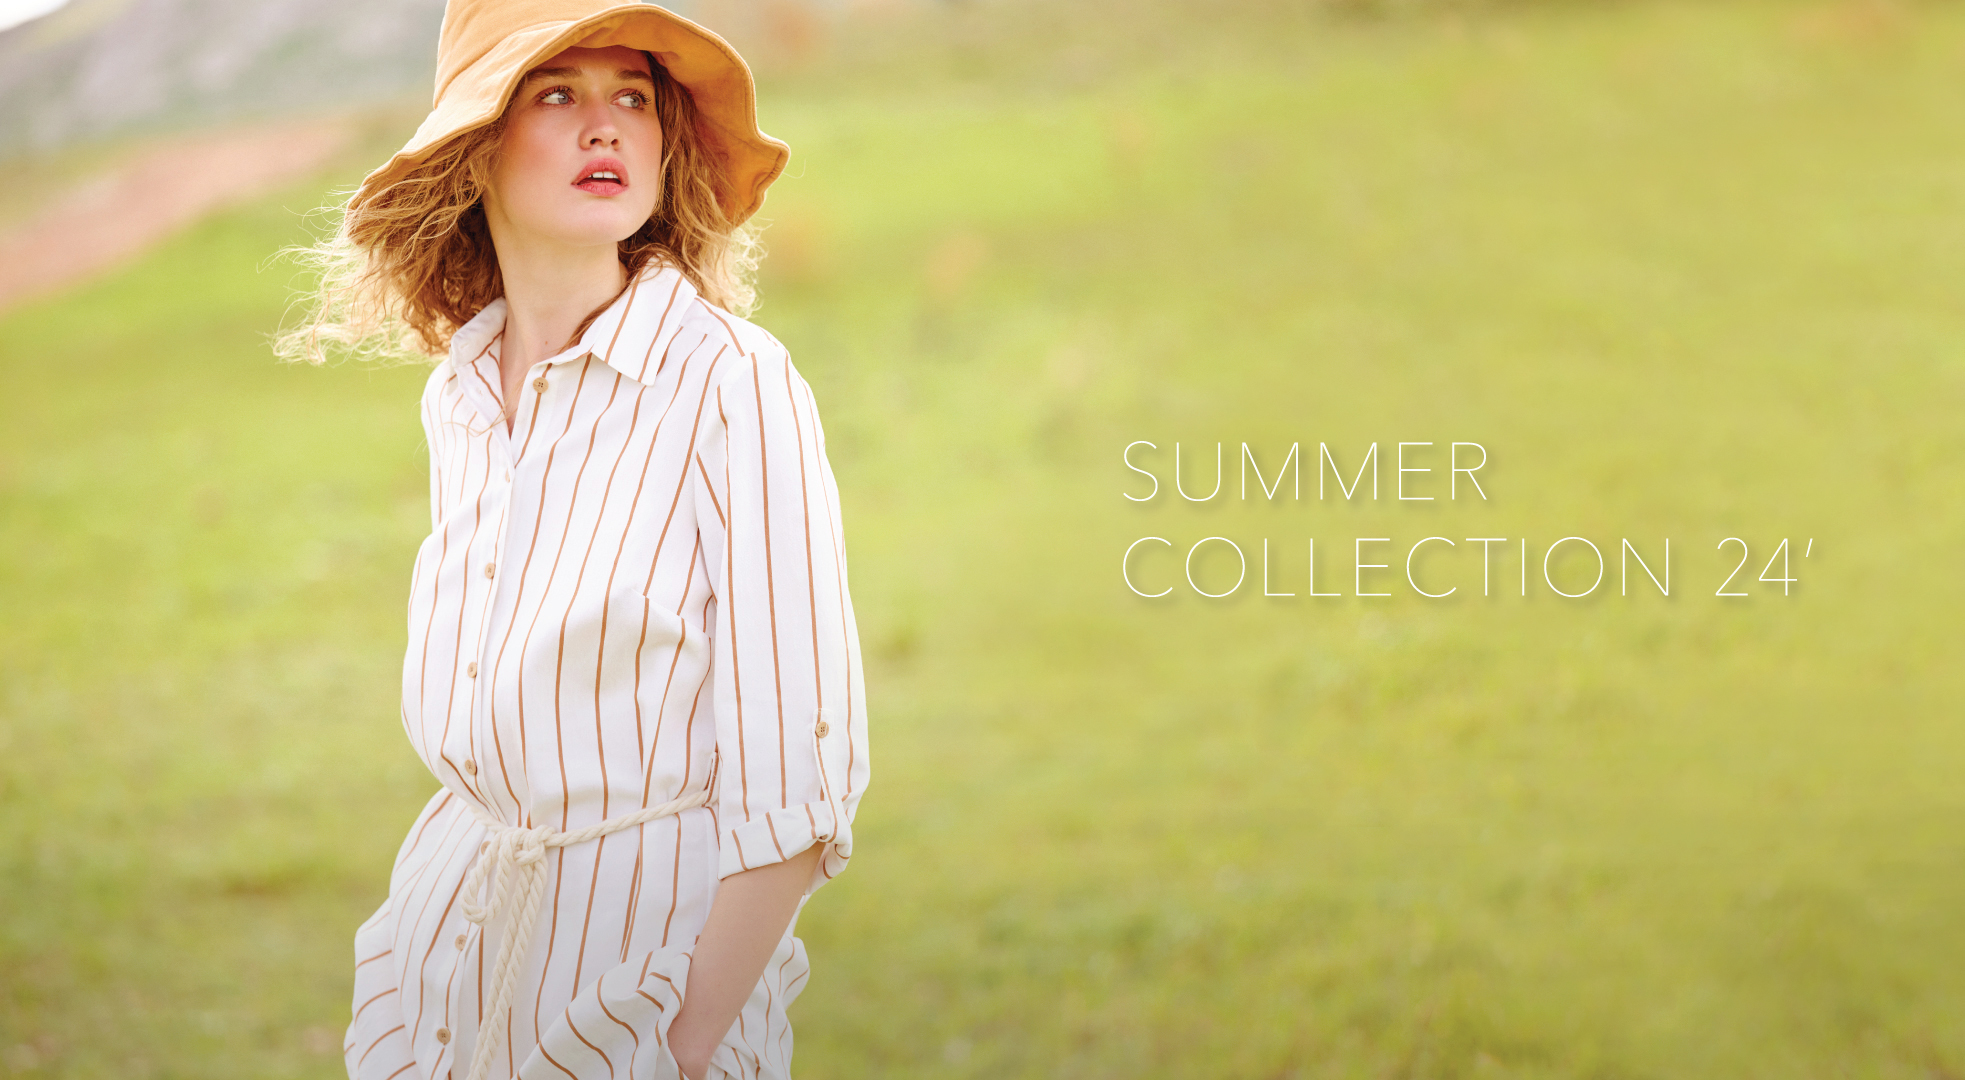 Summer Collection 24